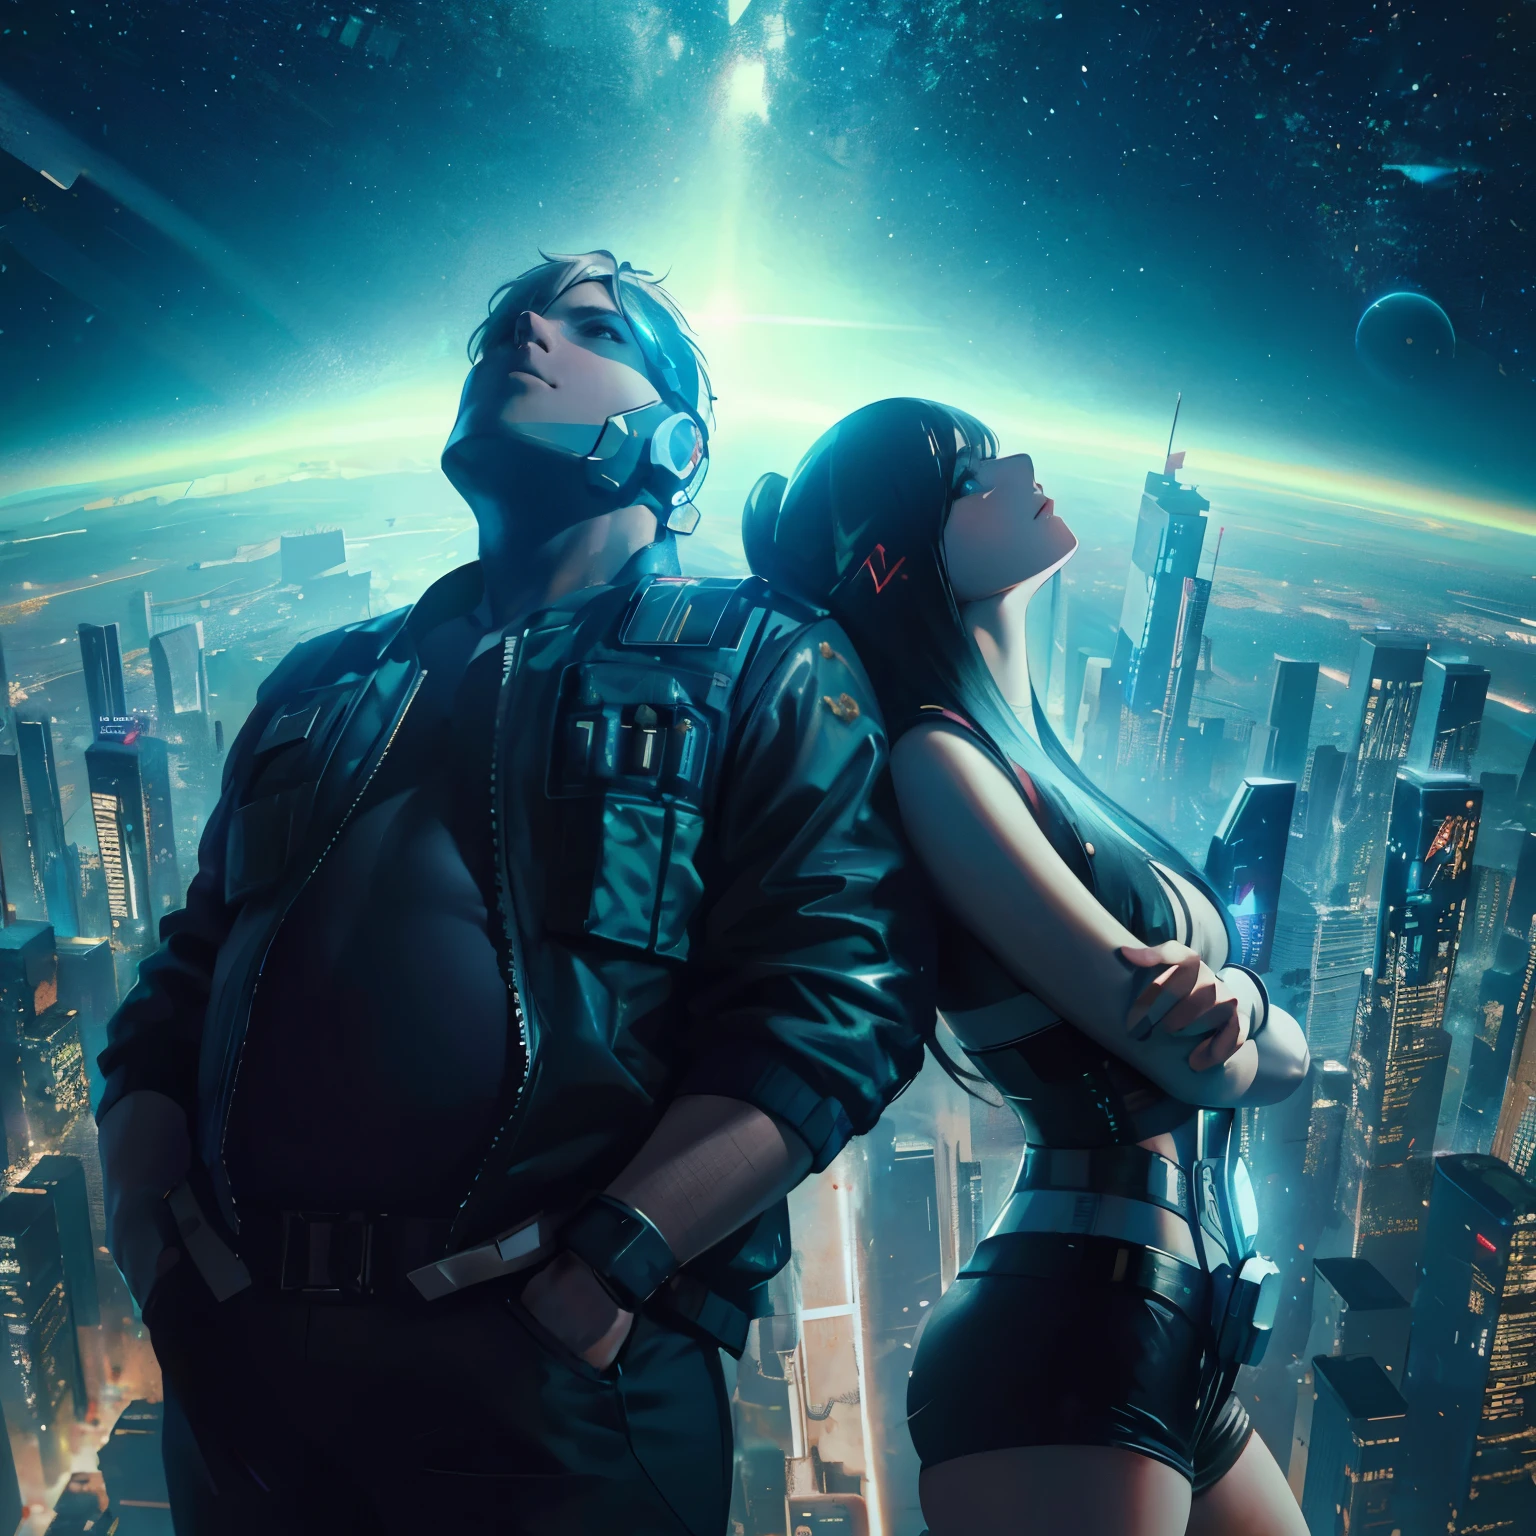 32k, Hyper Realistic, Cinematic scene, best romantic scene, looking up, facing foward, chubby man and slim woman standing lean each other in opposite directions cyberpunk theme, Earth and space as background, beautiful galaxy views, Hyper detailed face, detailed environment, detailed cyberpunk theme